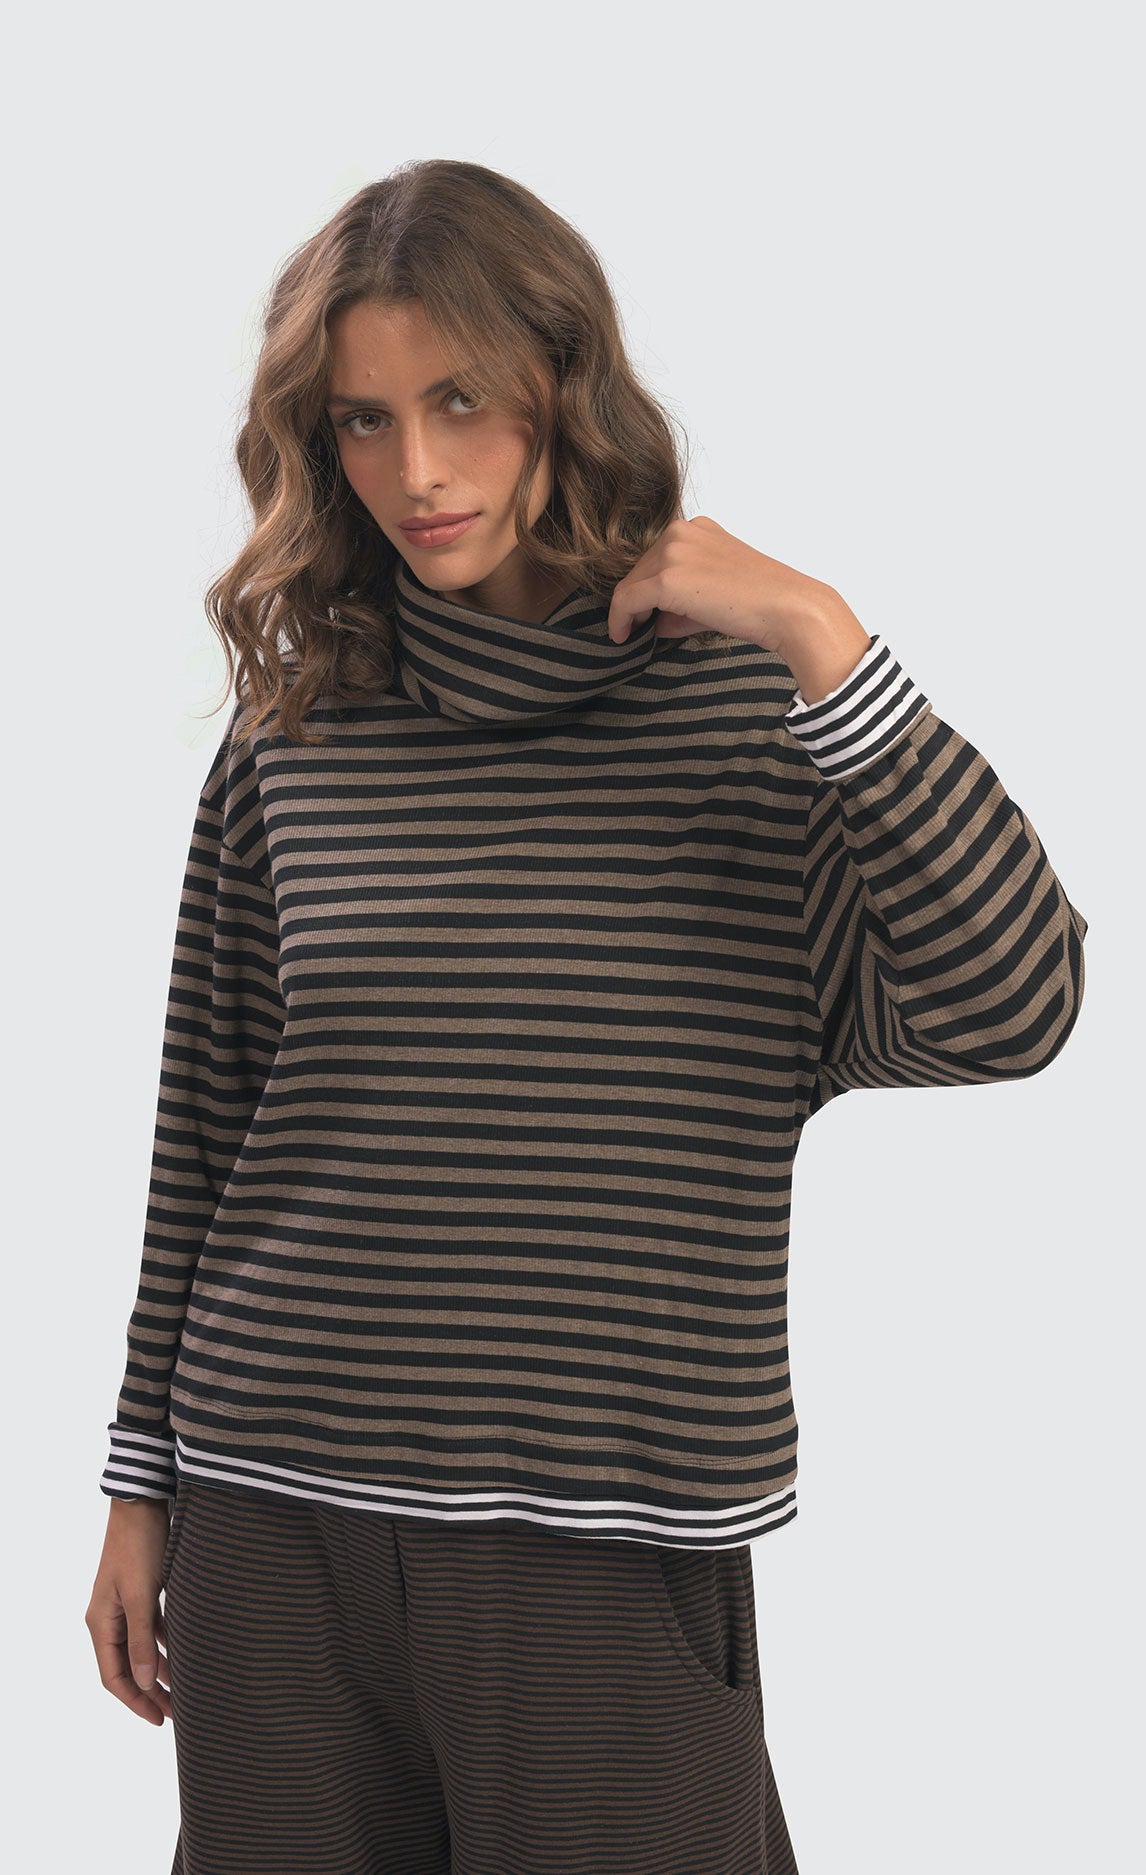 front top half view of a woman wearing the Alembika urban gateau cowlneck top in the brown and black striping. The top has a cowlneck, a relaxed fit, and contrasting black and white hems and cuffs.